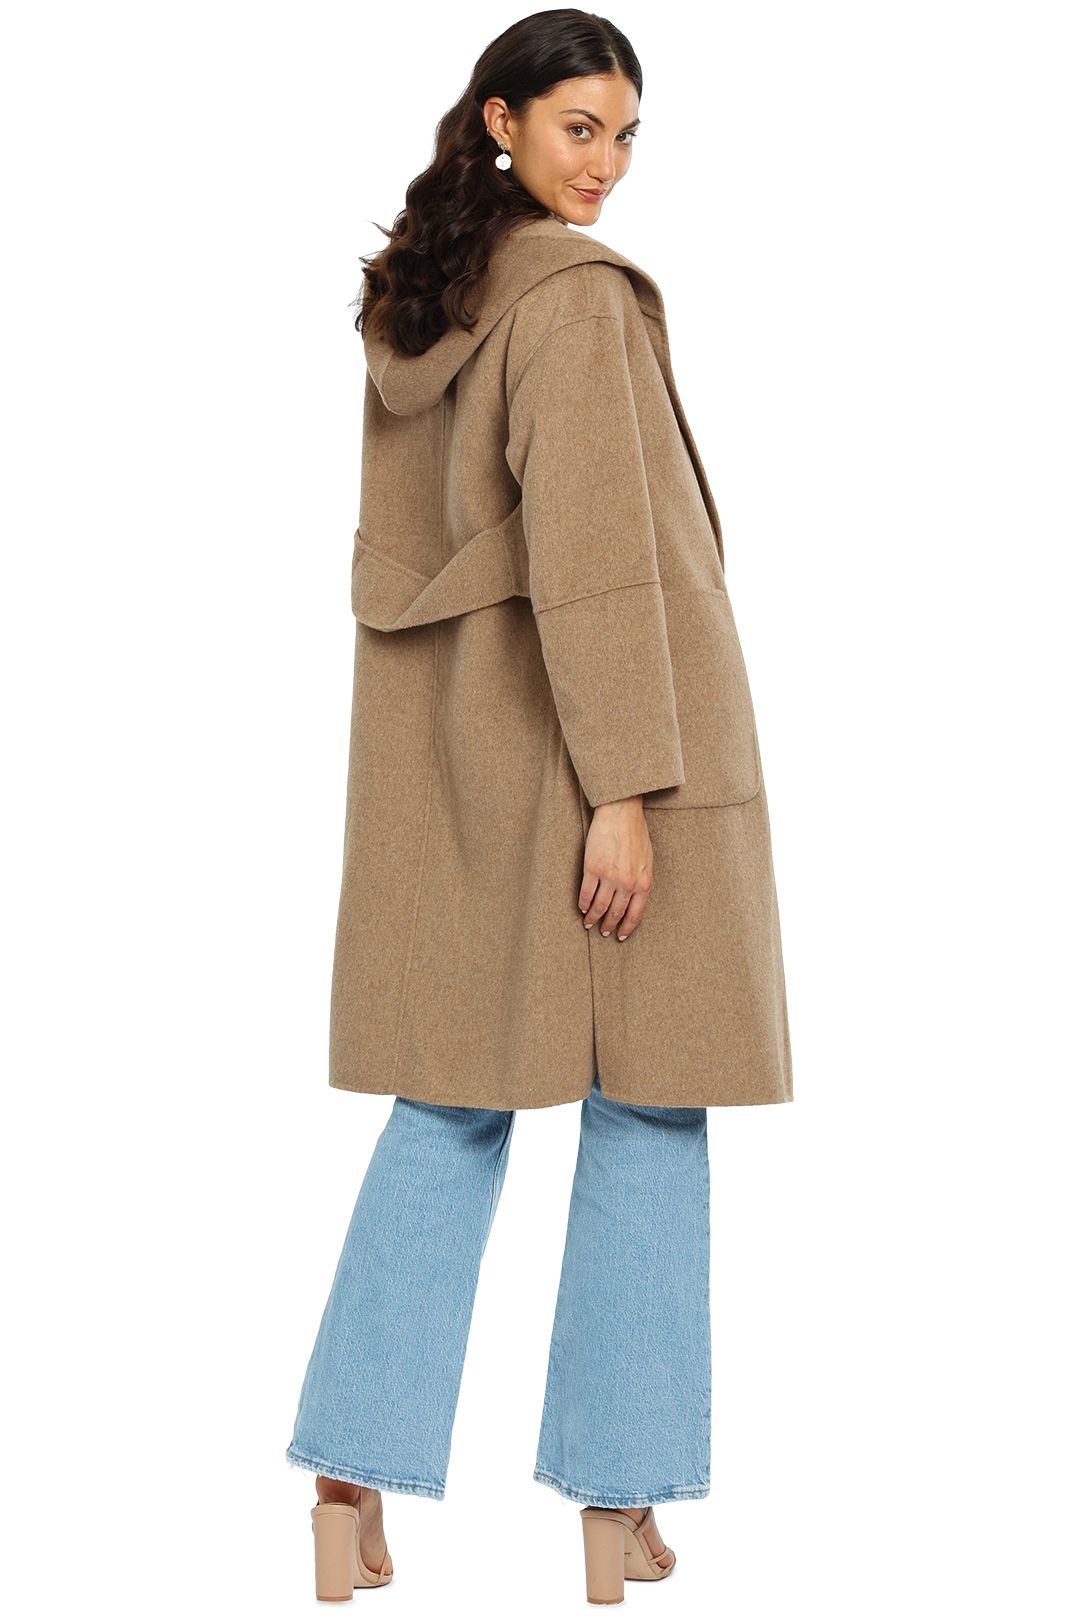 Belle and BloomWalk This Way Coat Oat Midi